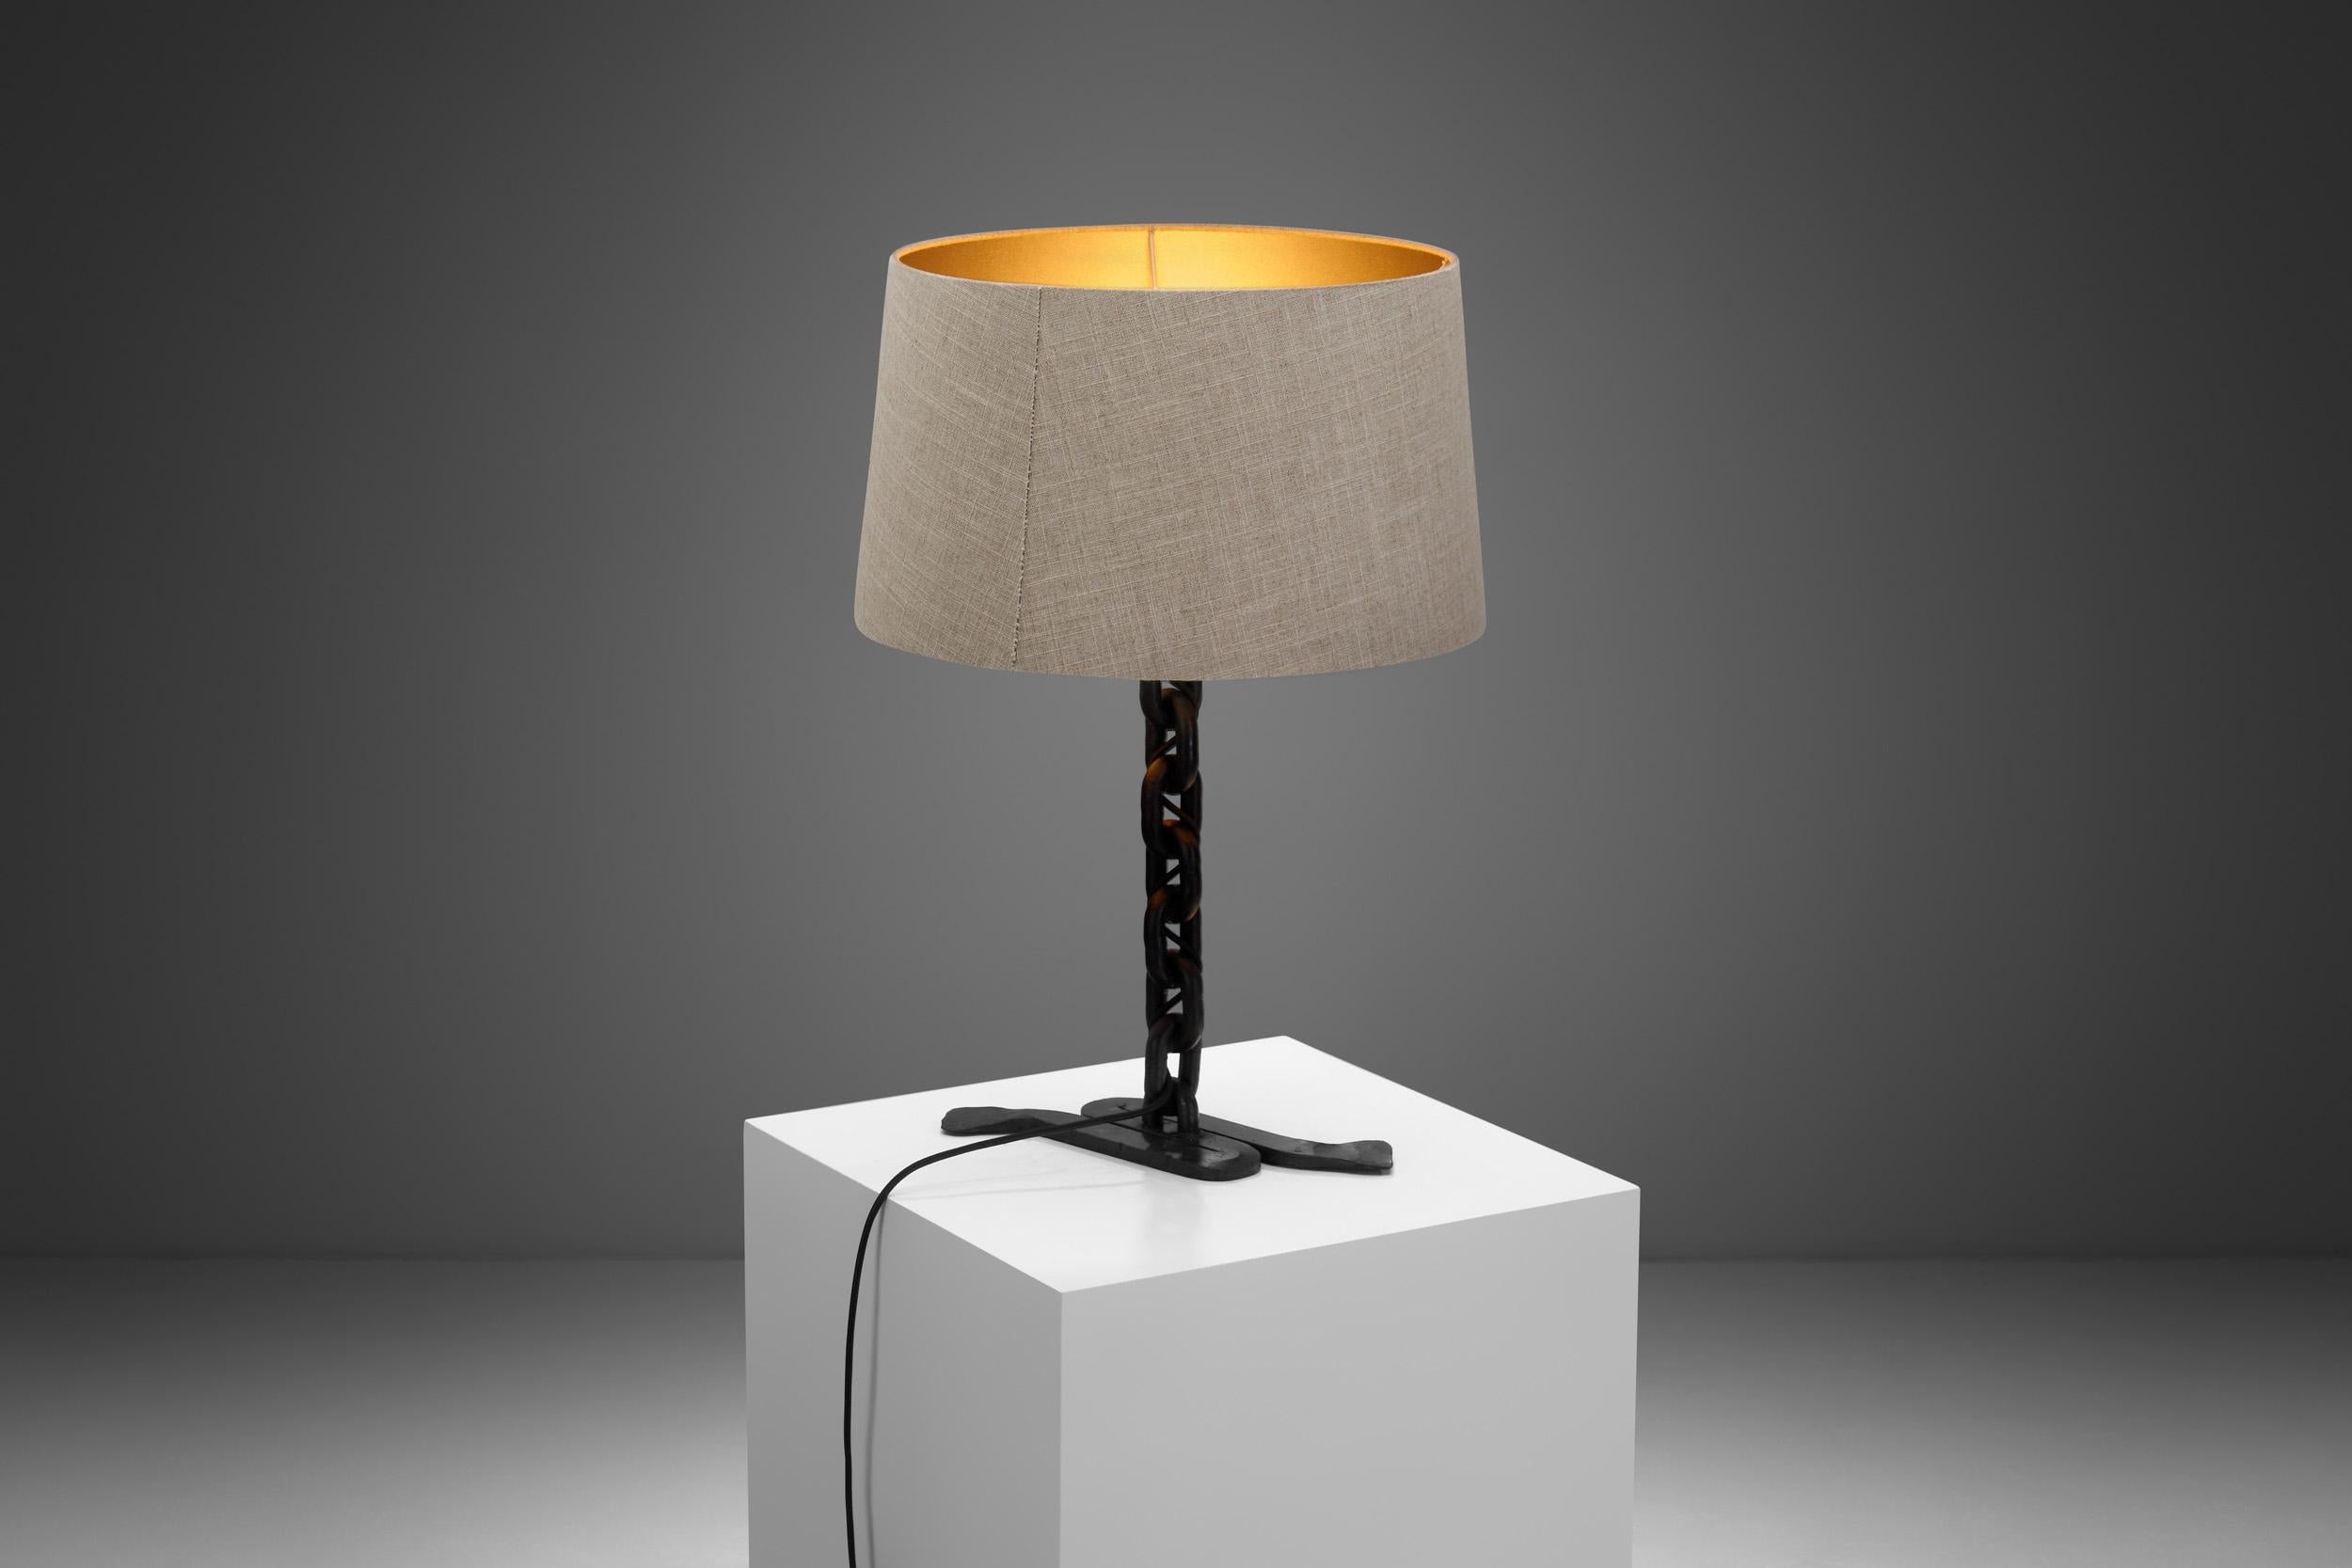 This individualistic table lamp is a Brutalist piece from the 1960s with a characteristic design that is sure to stand out. The style is similar to that of Franz West with wrought iron chain links constituting the body.

From architectural